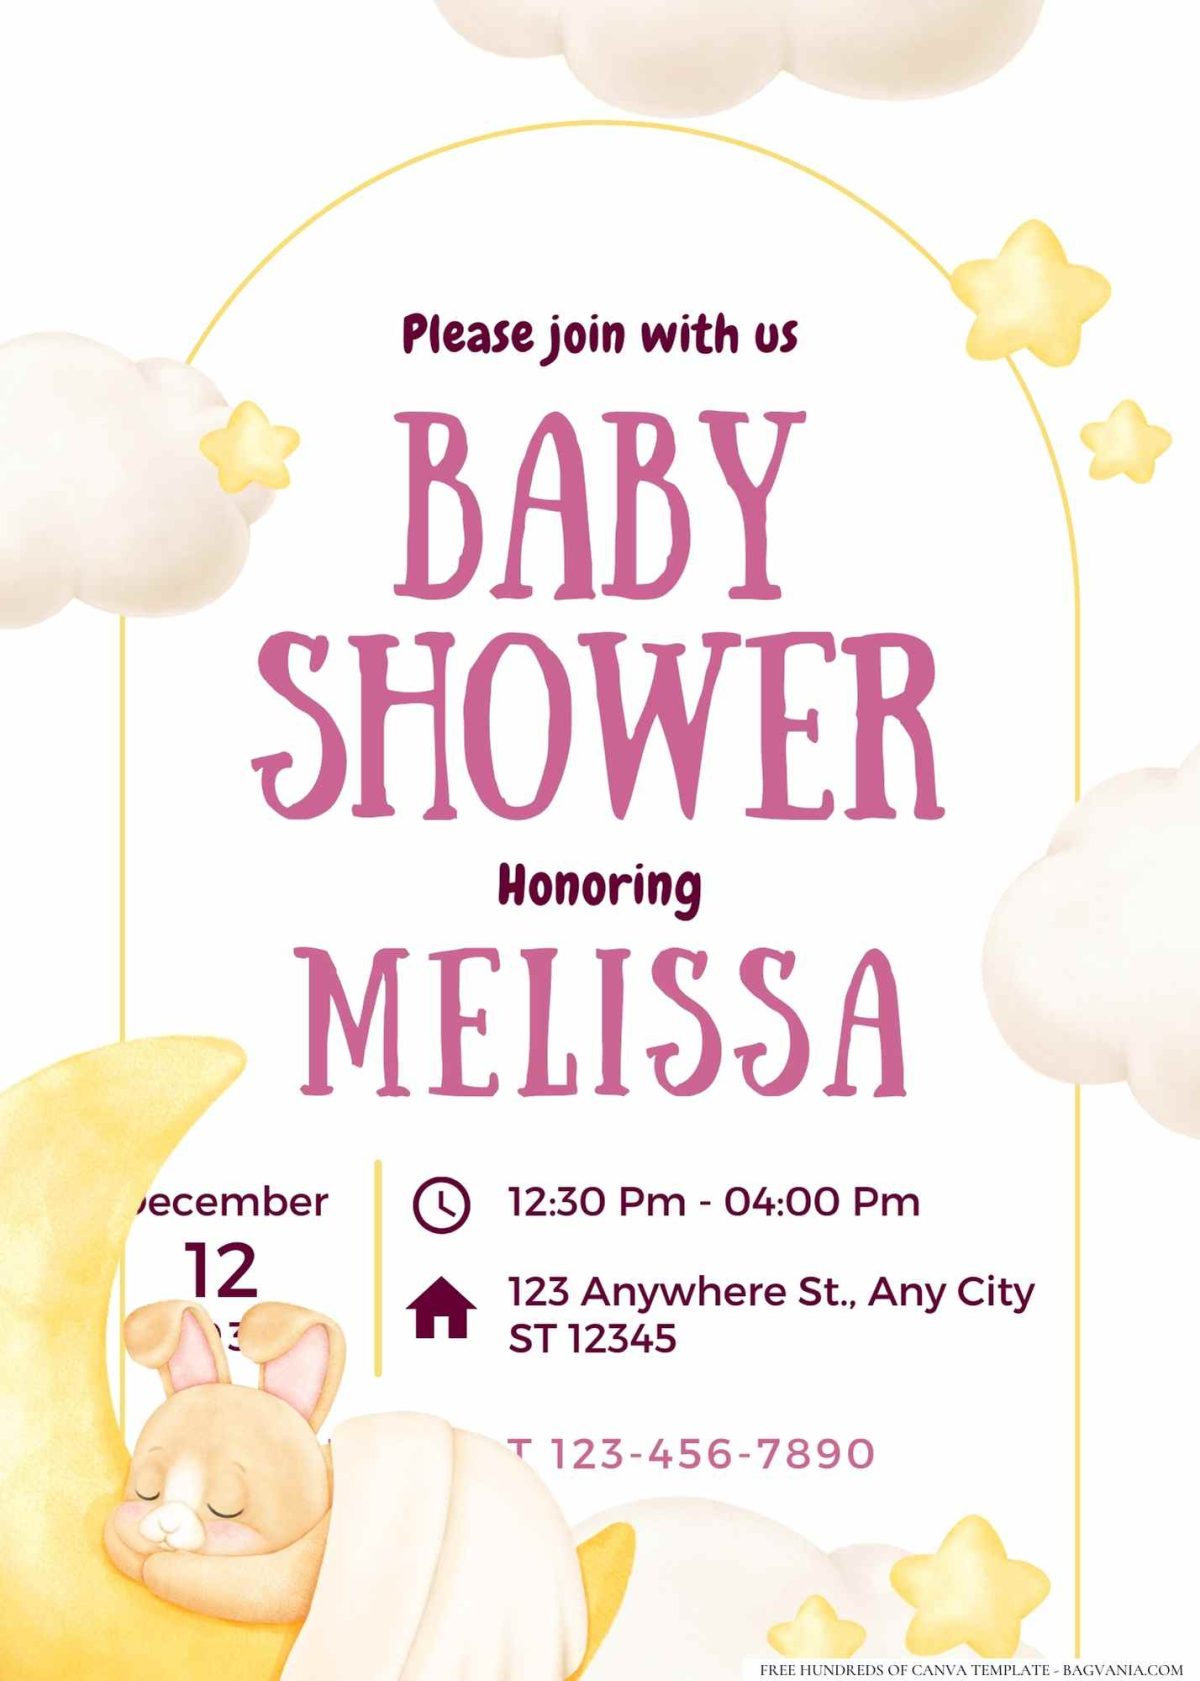 FREE Editable Once Upon a Time Storybook Baby Shower Invitation